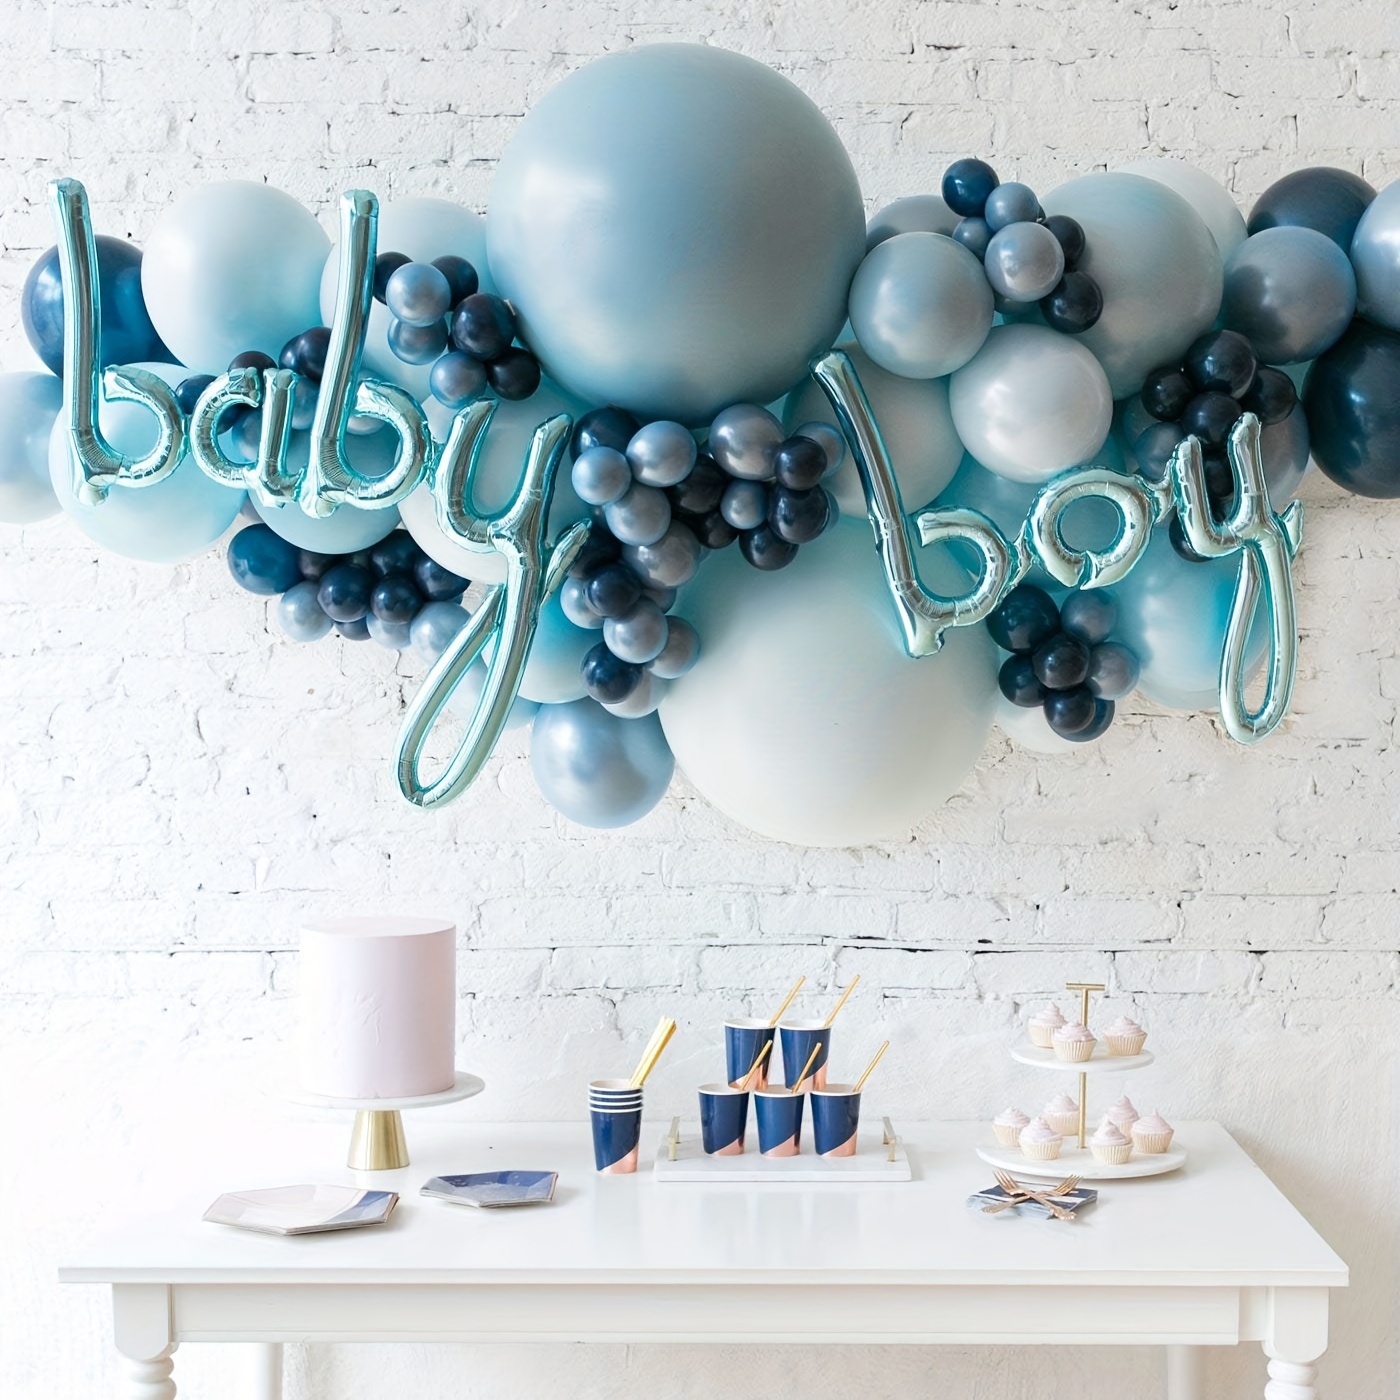 BOY GIRL Balloons Connected Letters Word Foil Baby Shower Air